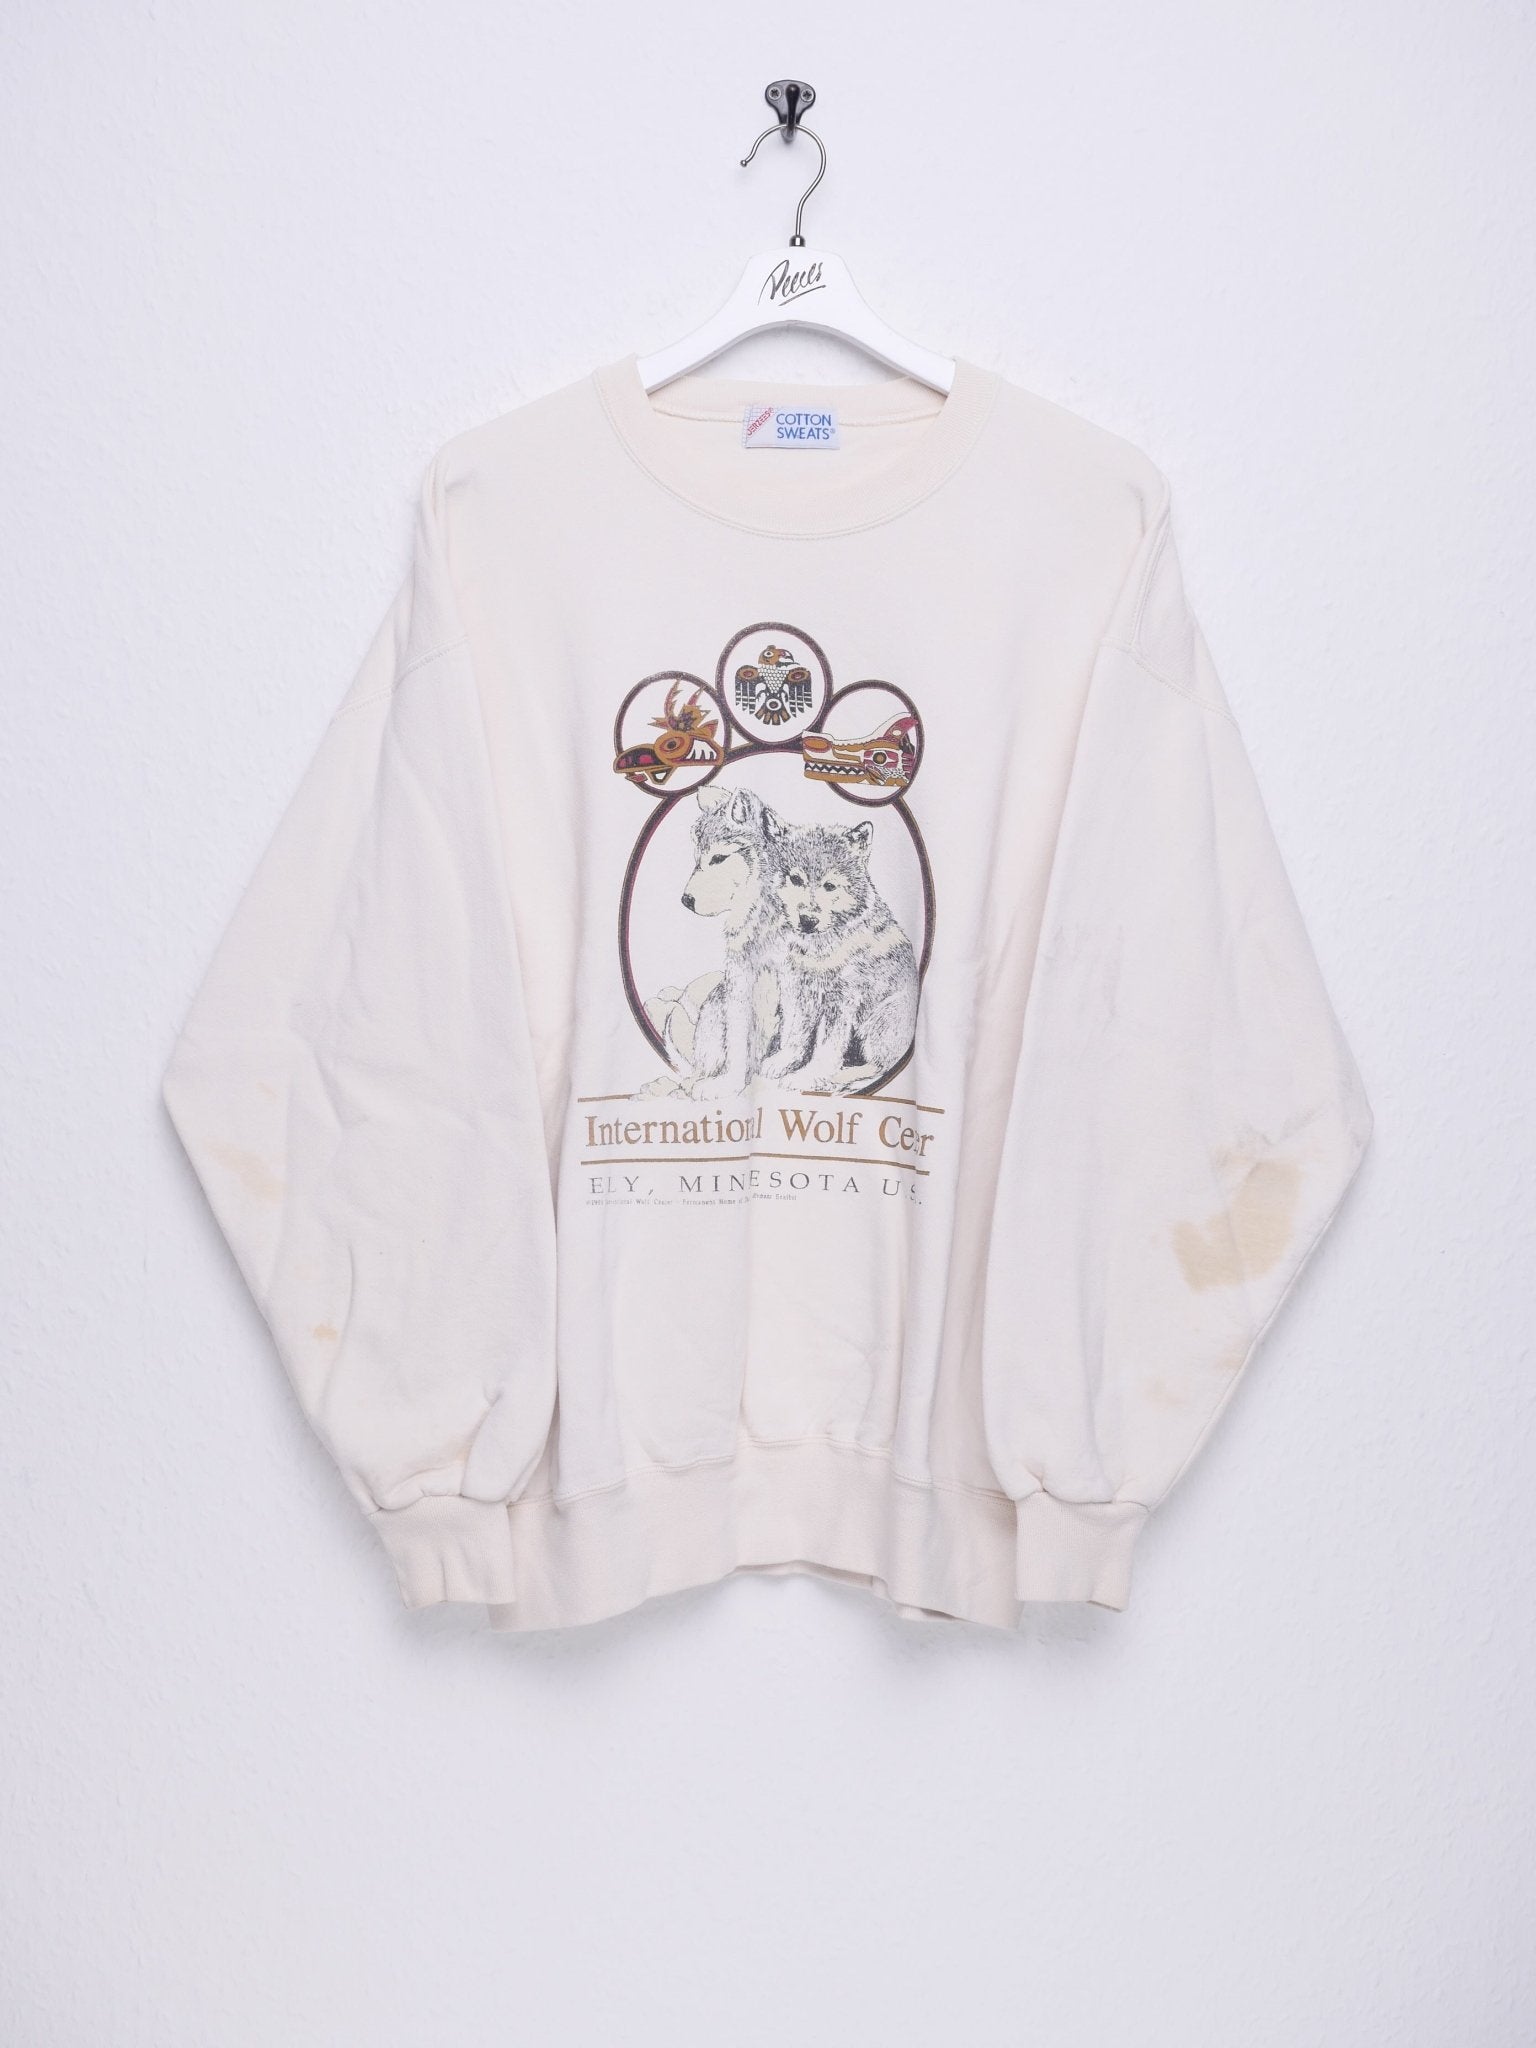 jerzees 'International Wolf Center' printed Graphic White Sweater - Peeces